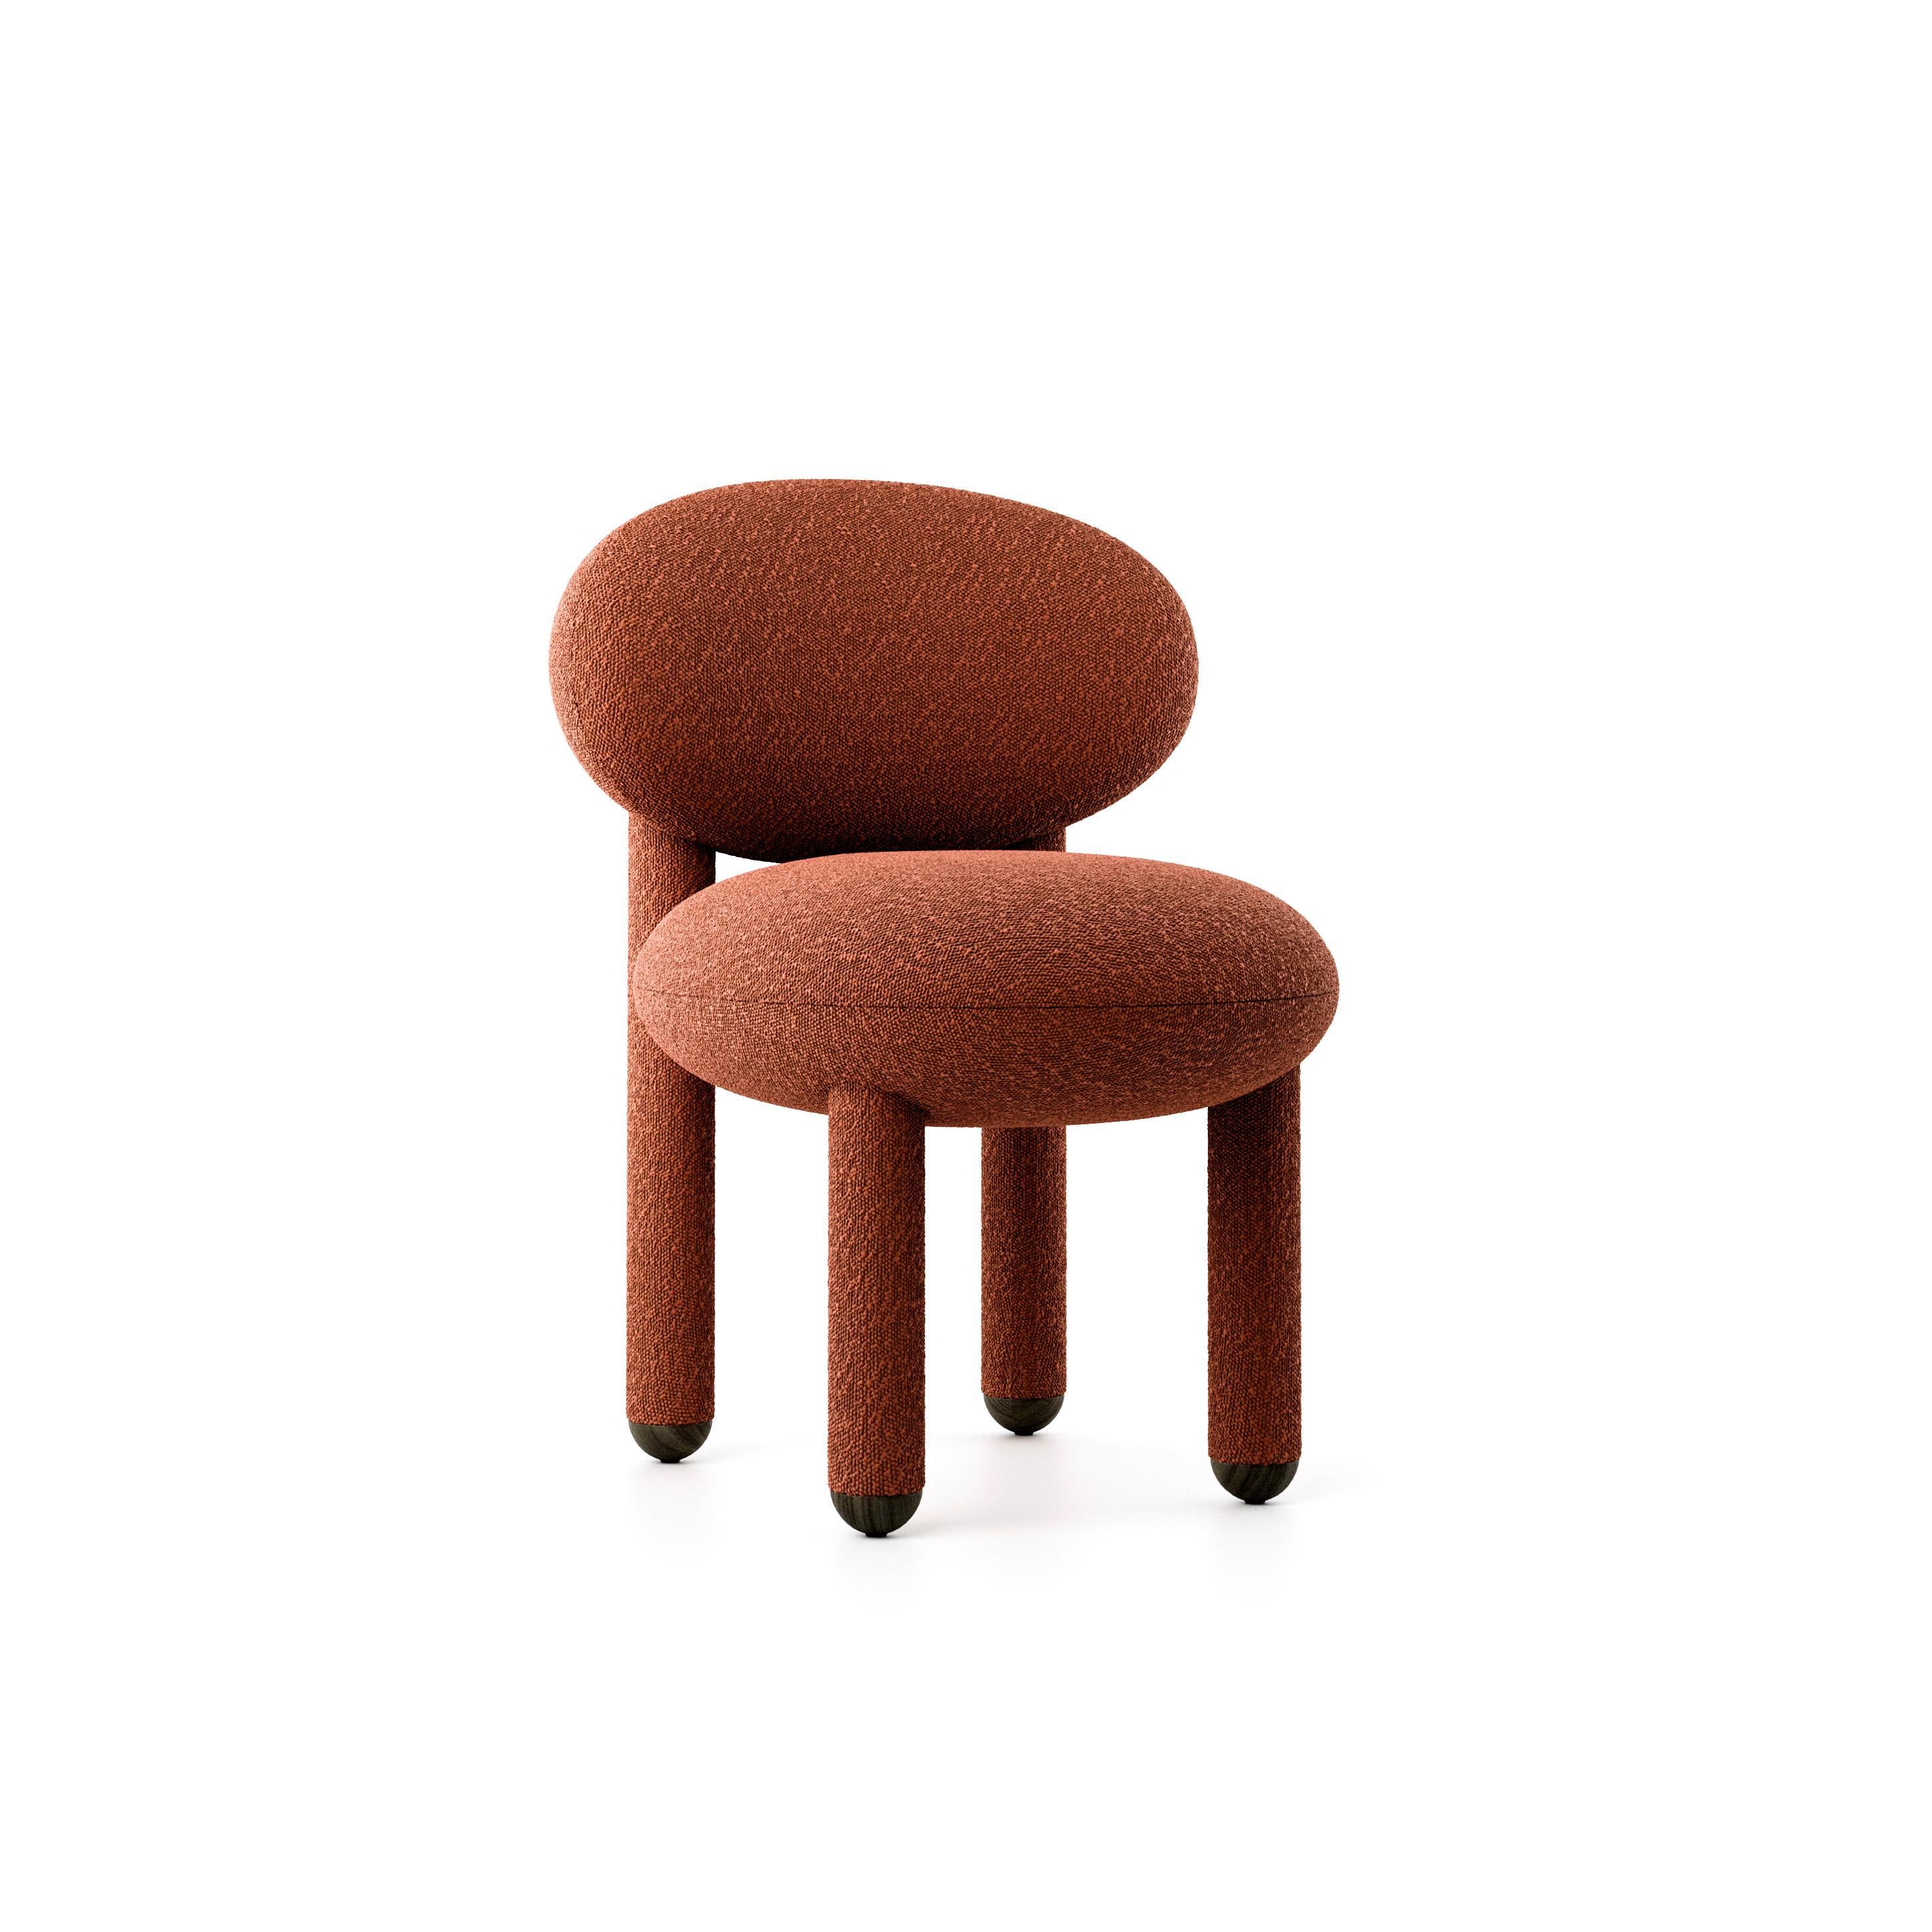 Dining Chair Flock CS1 by Noom
Designer: Kateryna Sokolova

Materials: wood, plywood, metal, molded foam, textile

Available in a wide range of colors and other finishes and fabrics on request.

Dimensions: H 78 cm, W 55 cm, D 61 cm  seat H 47